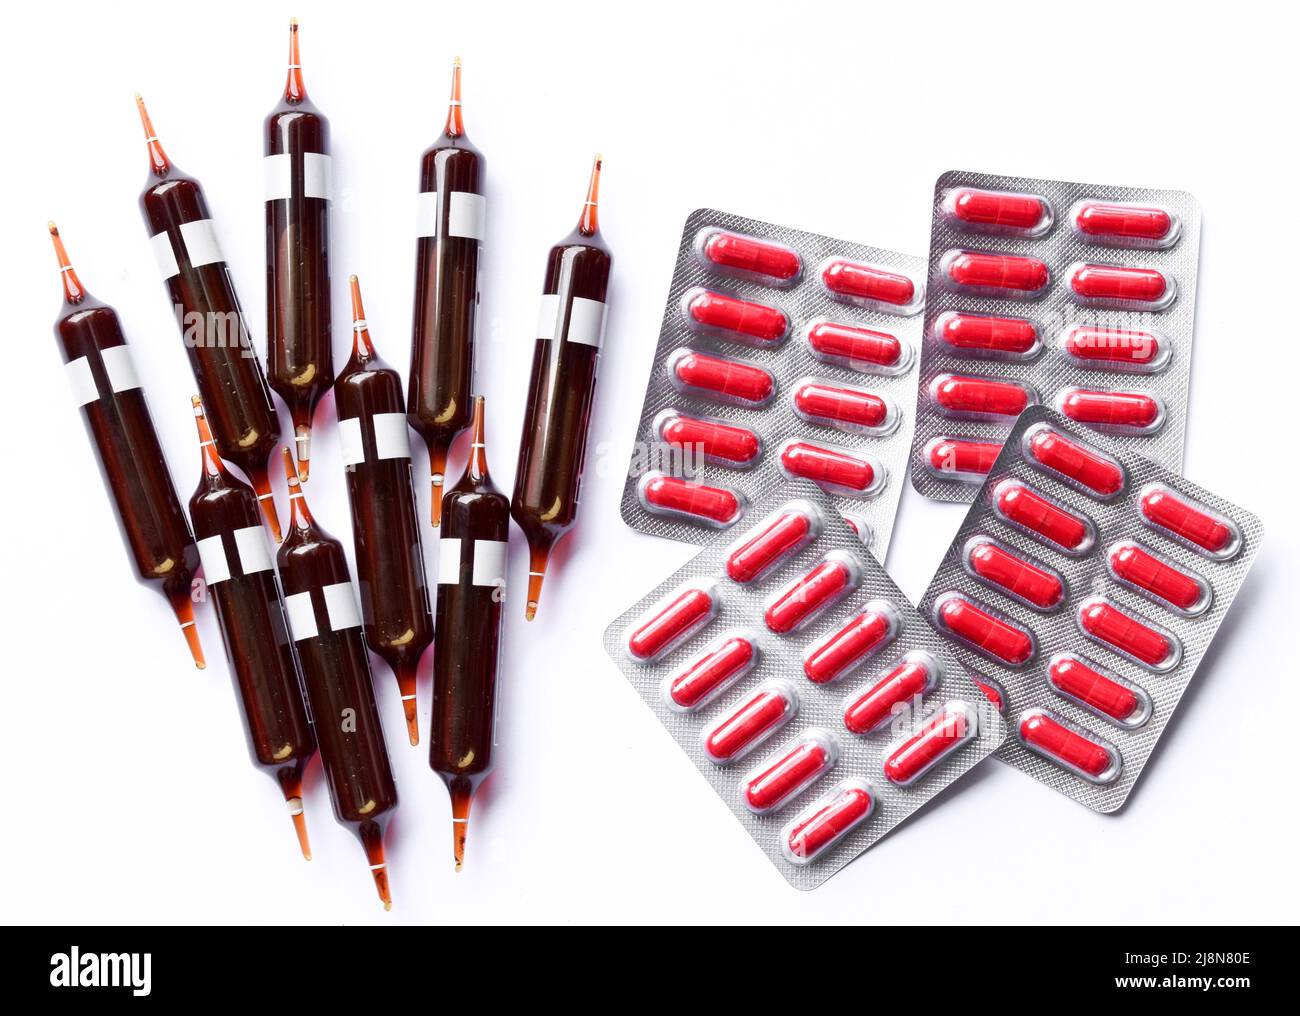 Glass ampoules and capsules containing iron supplement solution to treat anaemia. Stock Photo